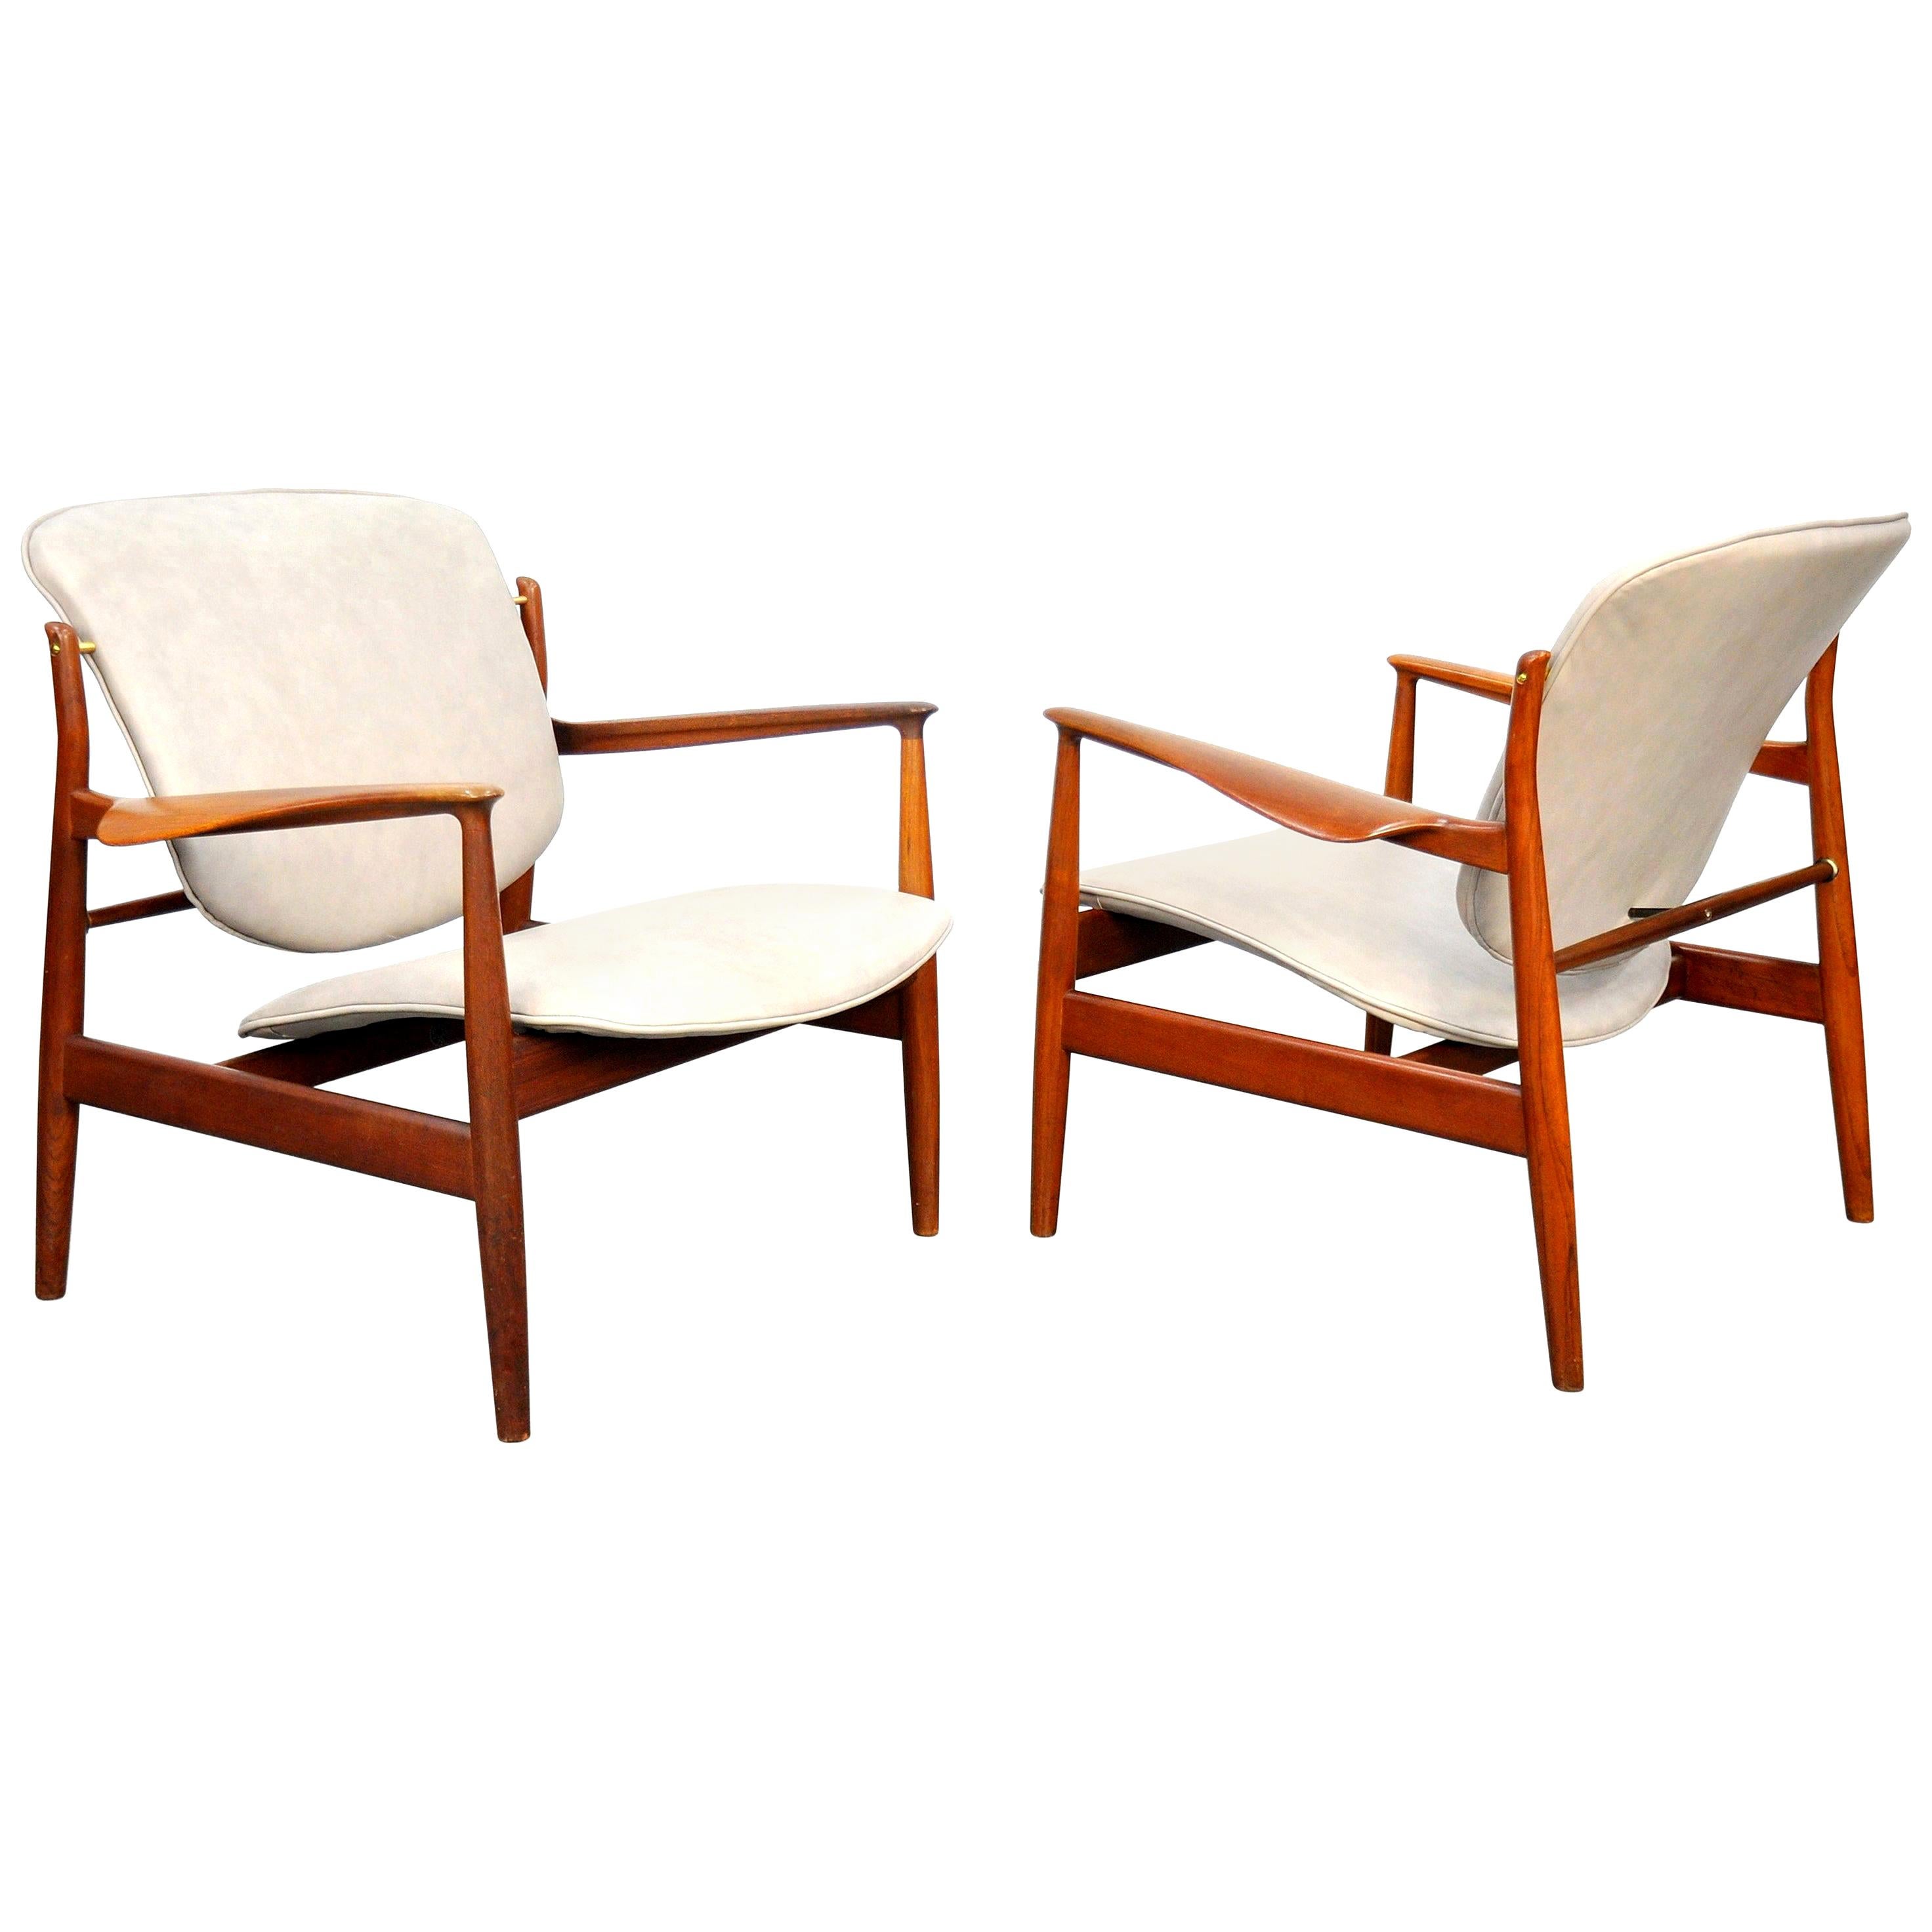 Pair of Finn Juhl FD 136 Teak and Grey Leather Lounge Chairs